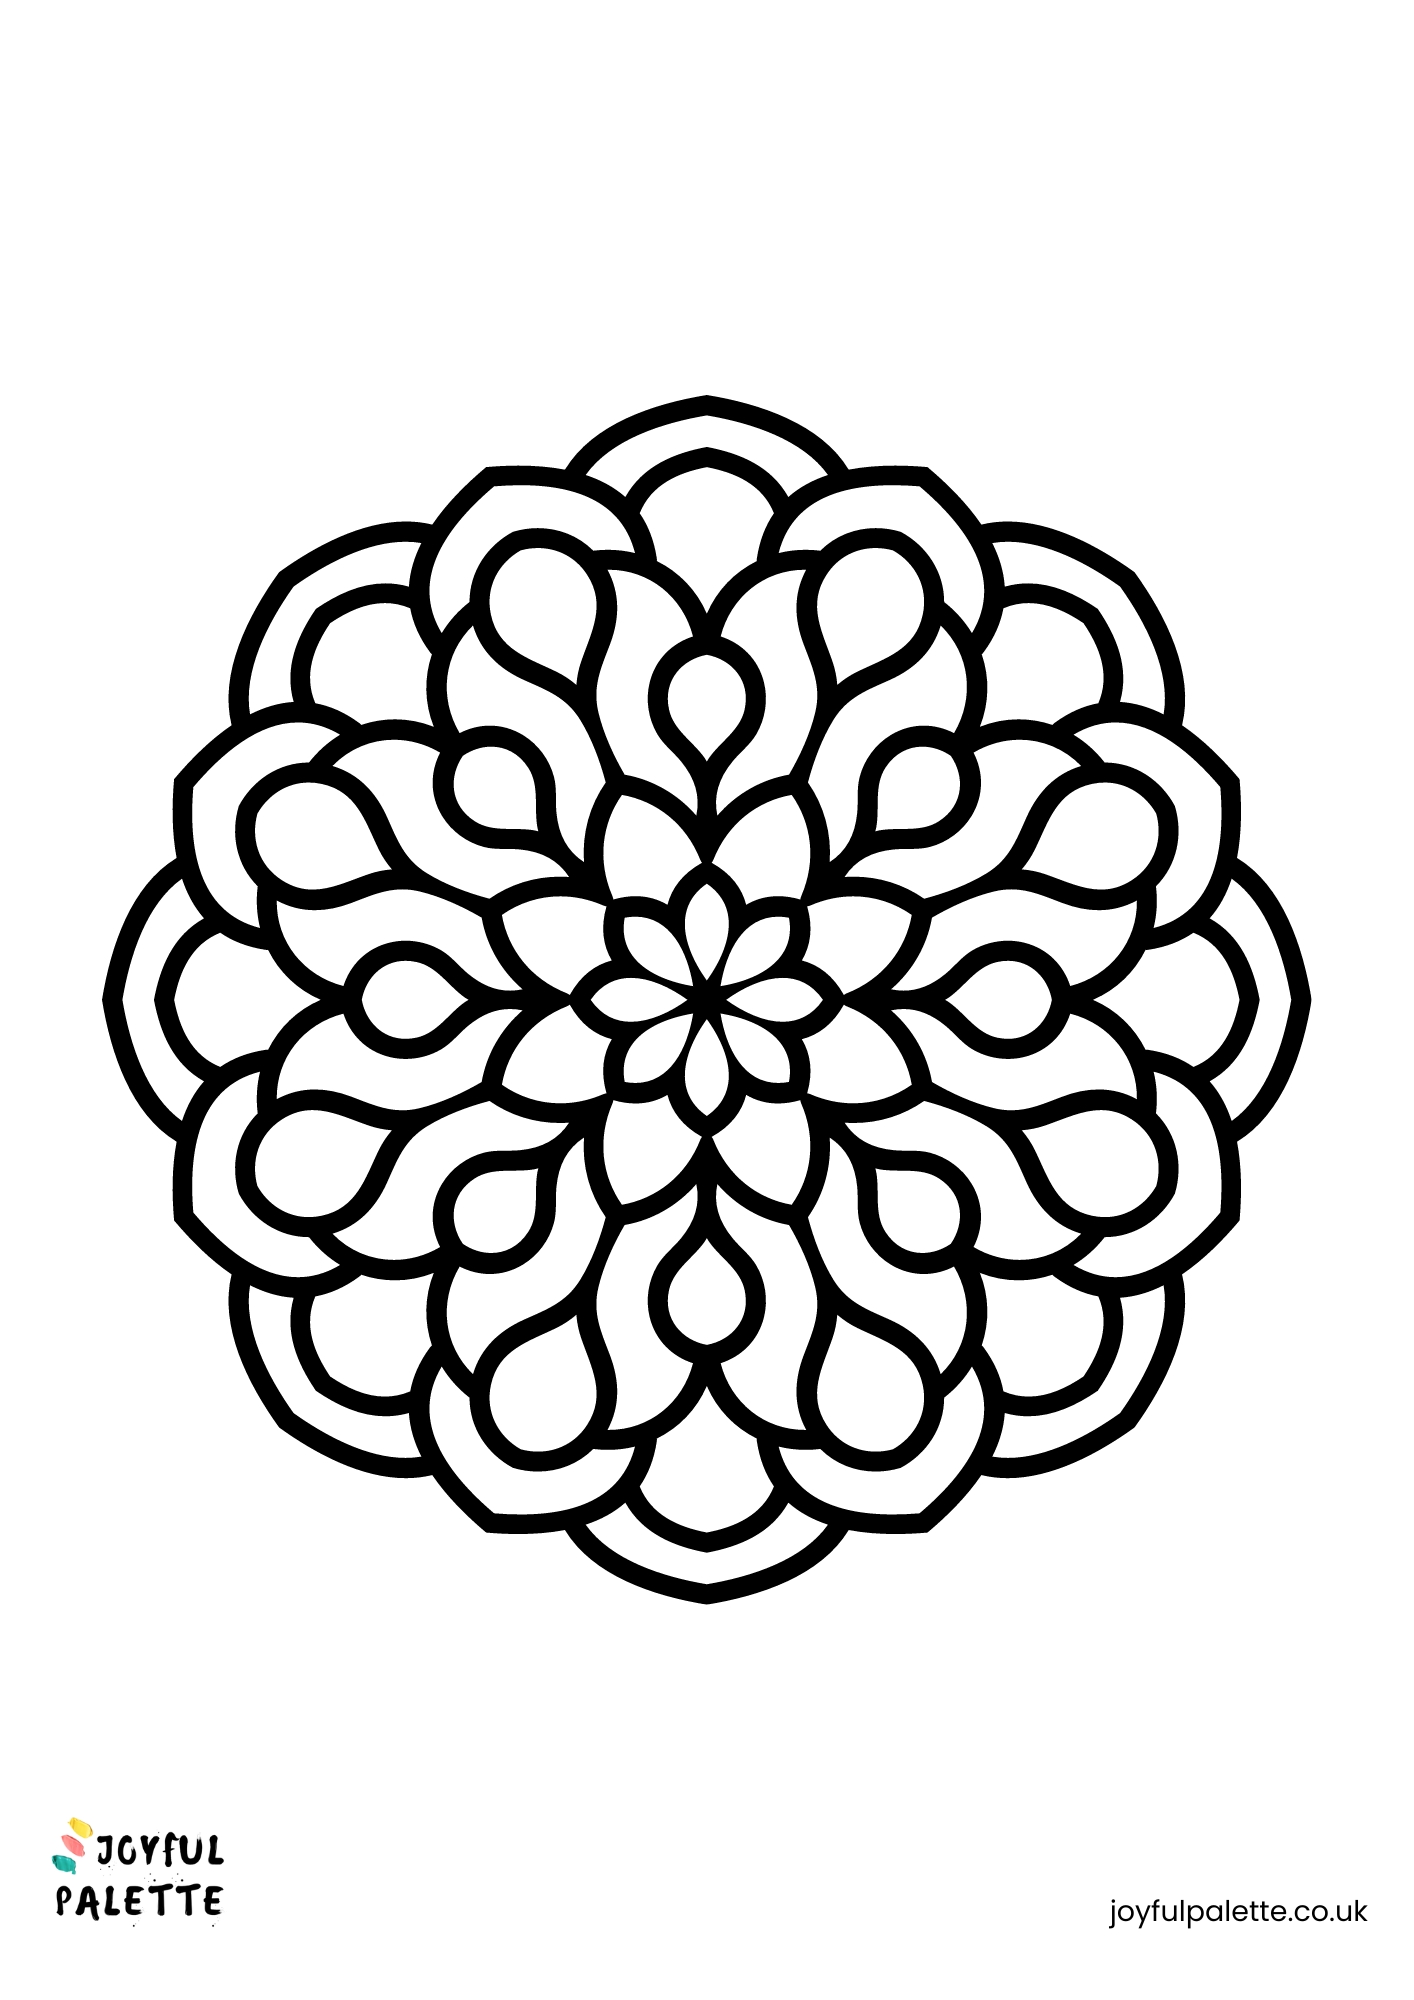 Easy Mandala Coloring Page for Kids